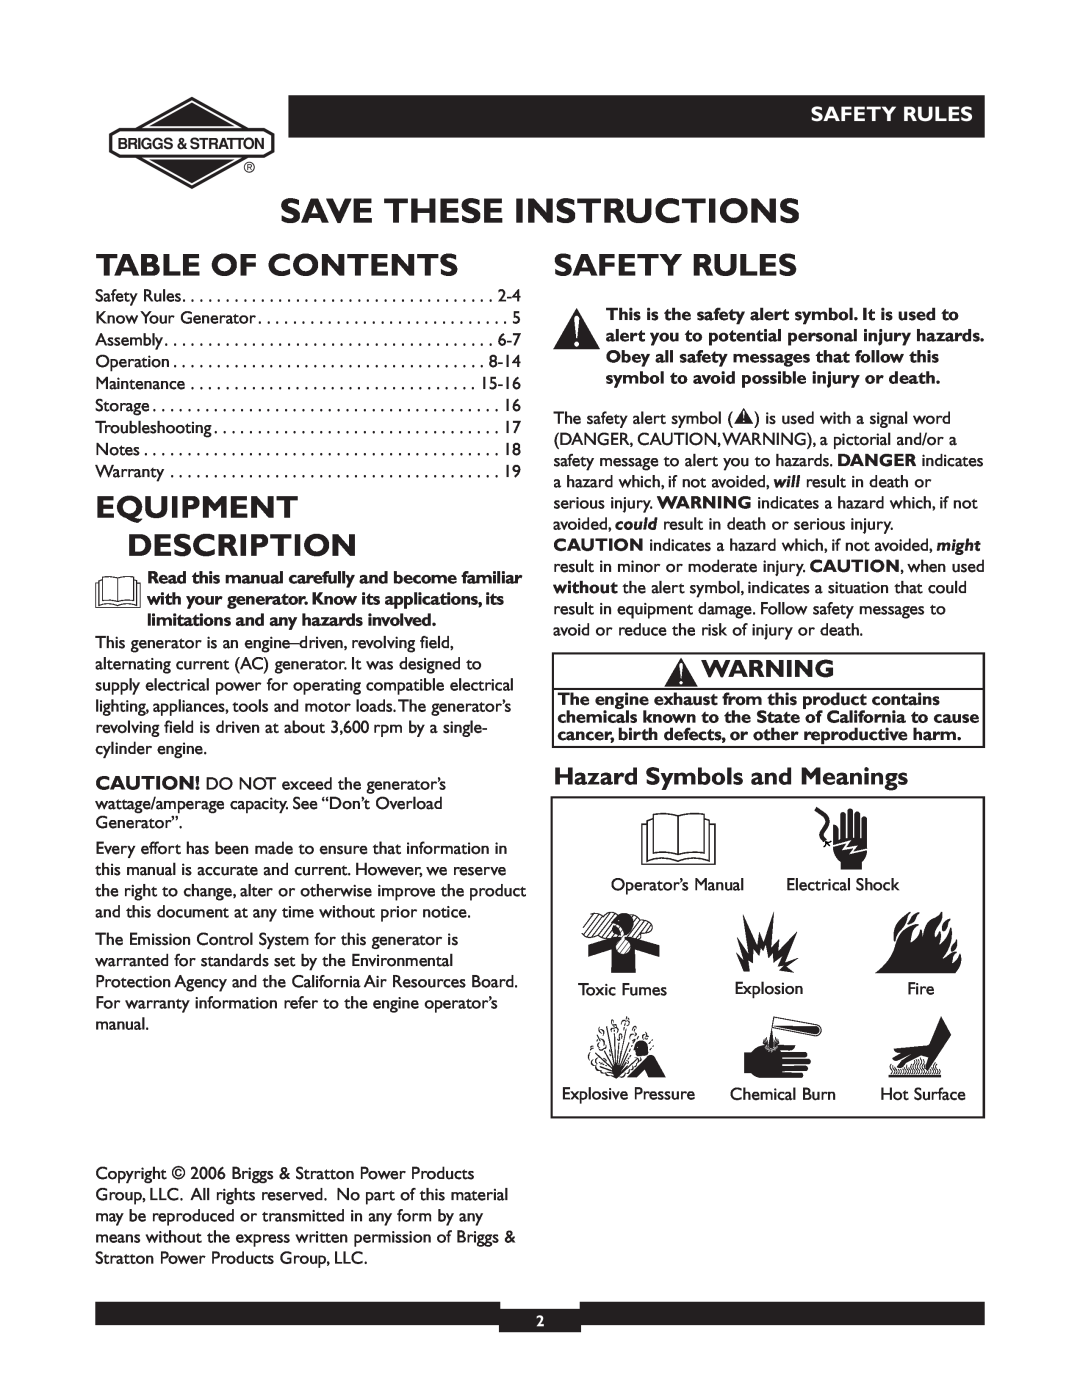 Briggs & Stratton 01894-1 manual Table Of Contents, Equipment Description, Safety Rules, Hazard Symbols and Meanings 